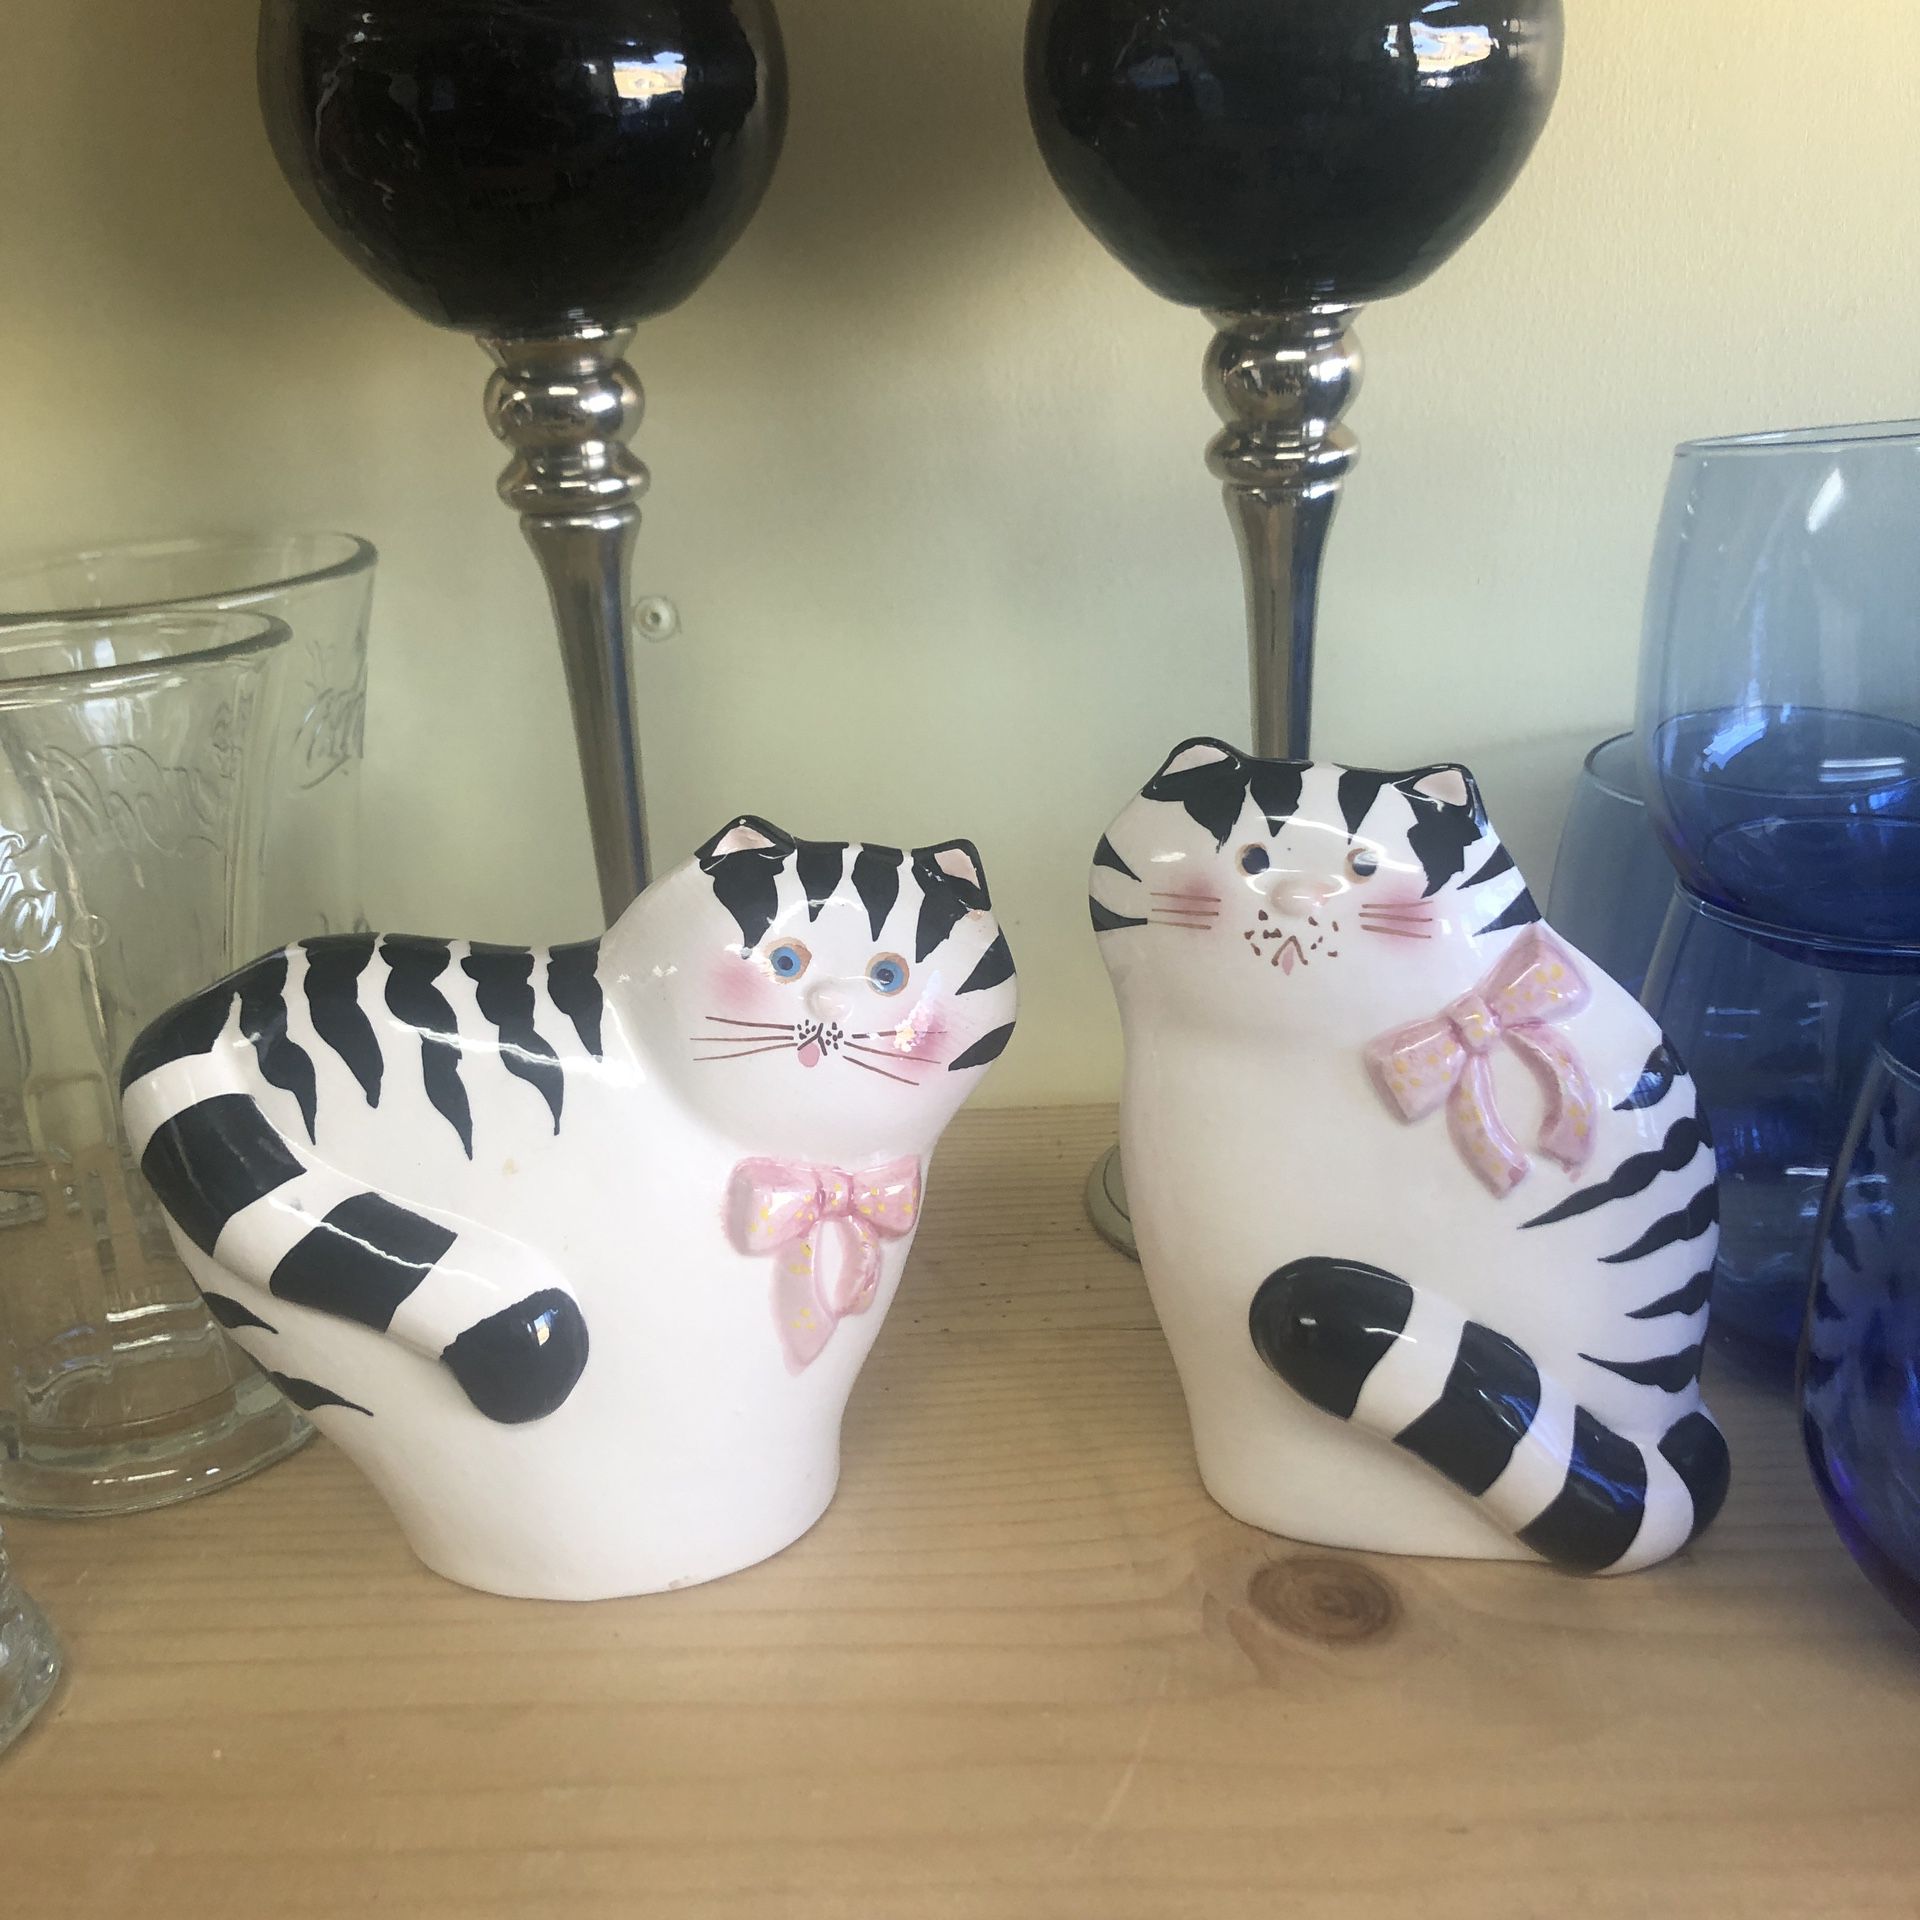 2 Sweet Hand Painted Black & White Ceramic Kitty Cat with Pink Bow Statuettes